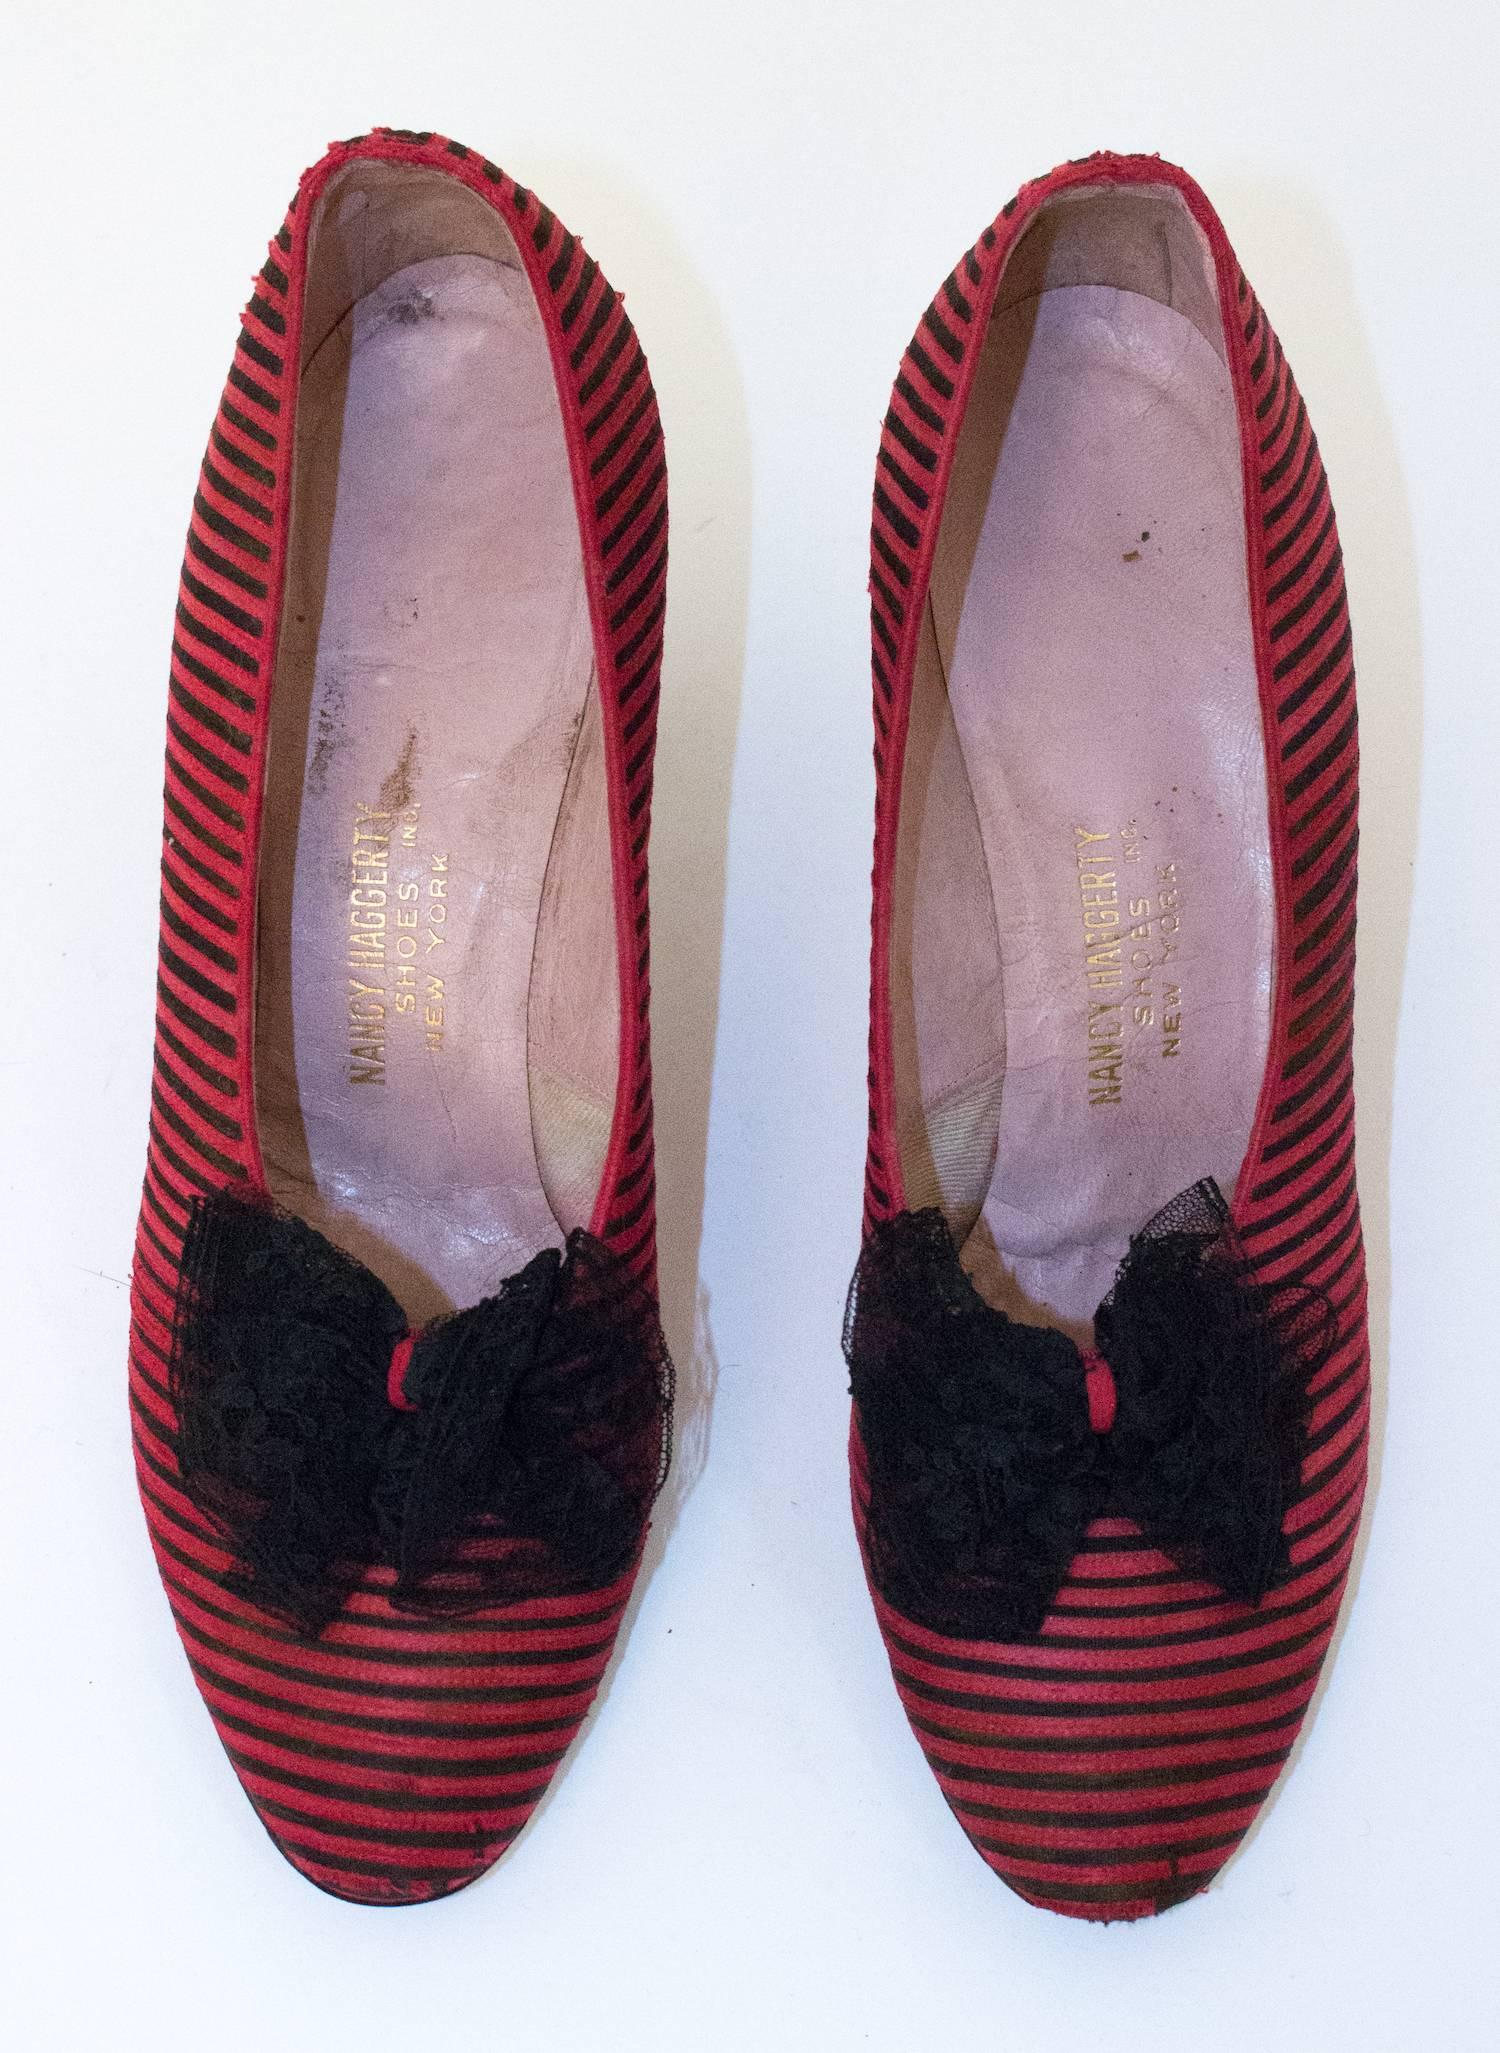 20s Magenta Striped with Lace Bow Heels.  Measures 9 1/2 inches long from heel to toe.